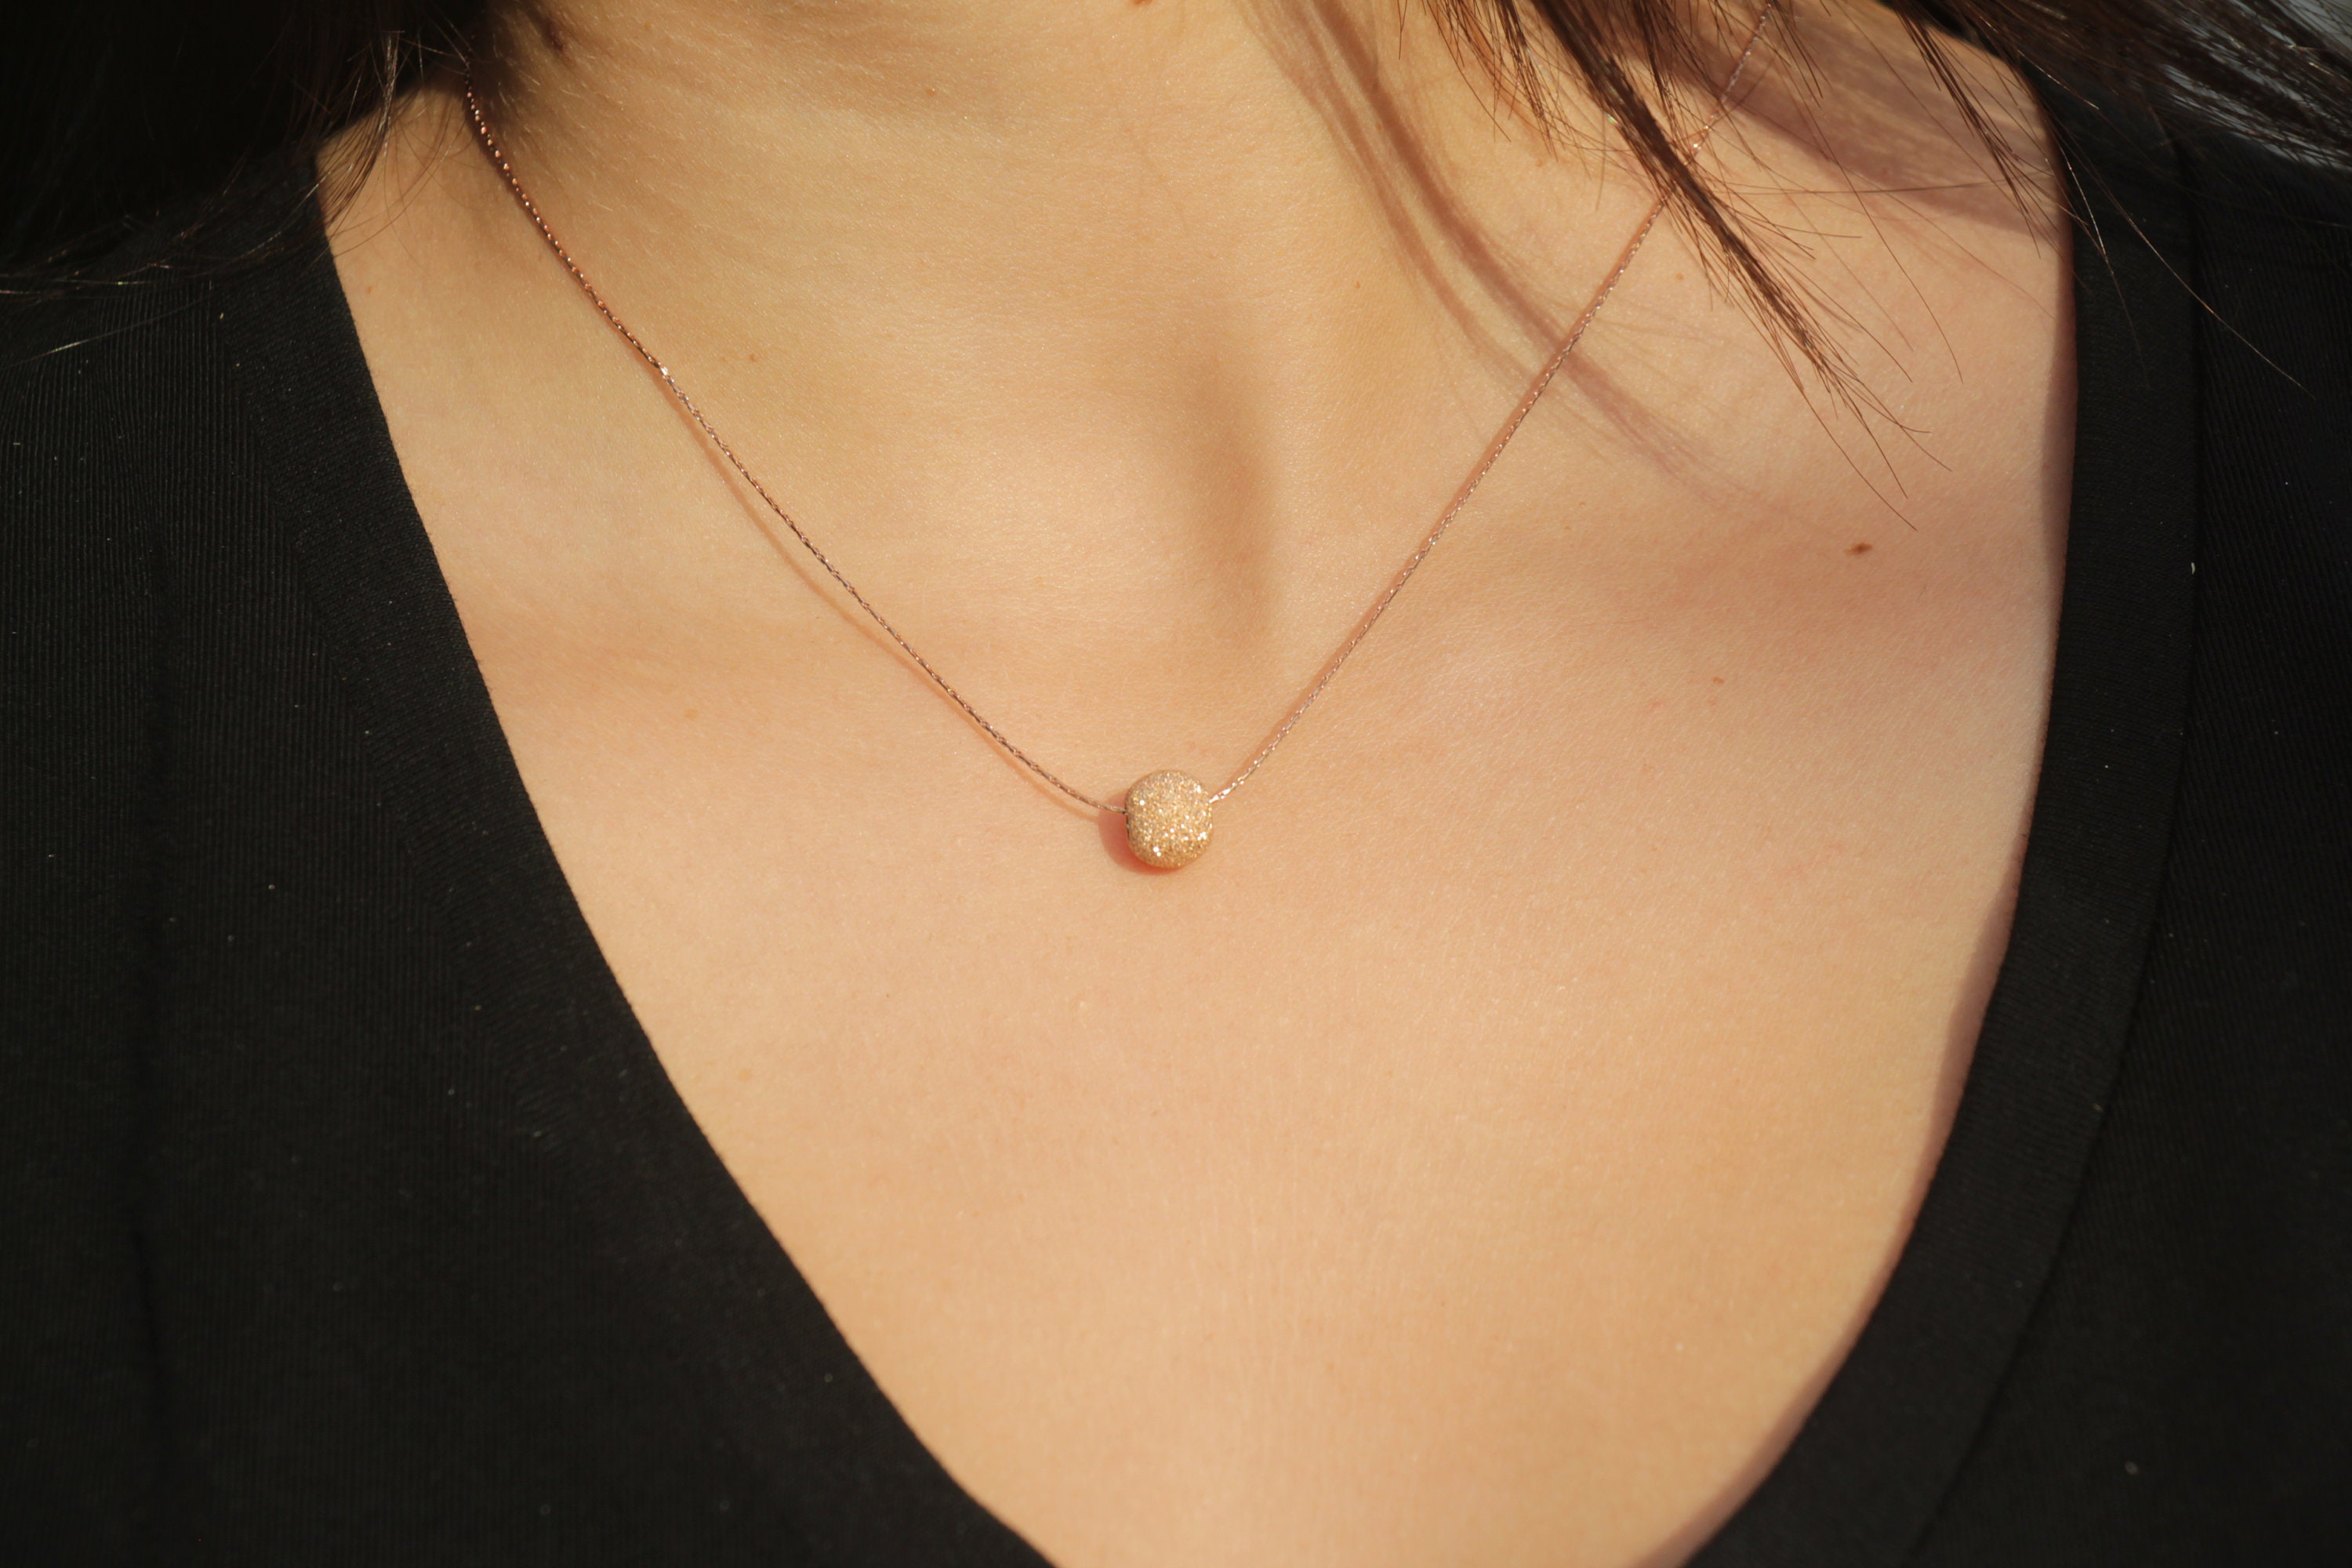 Single Bead Necklace in 14K Gold | Zales